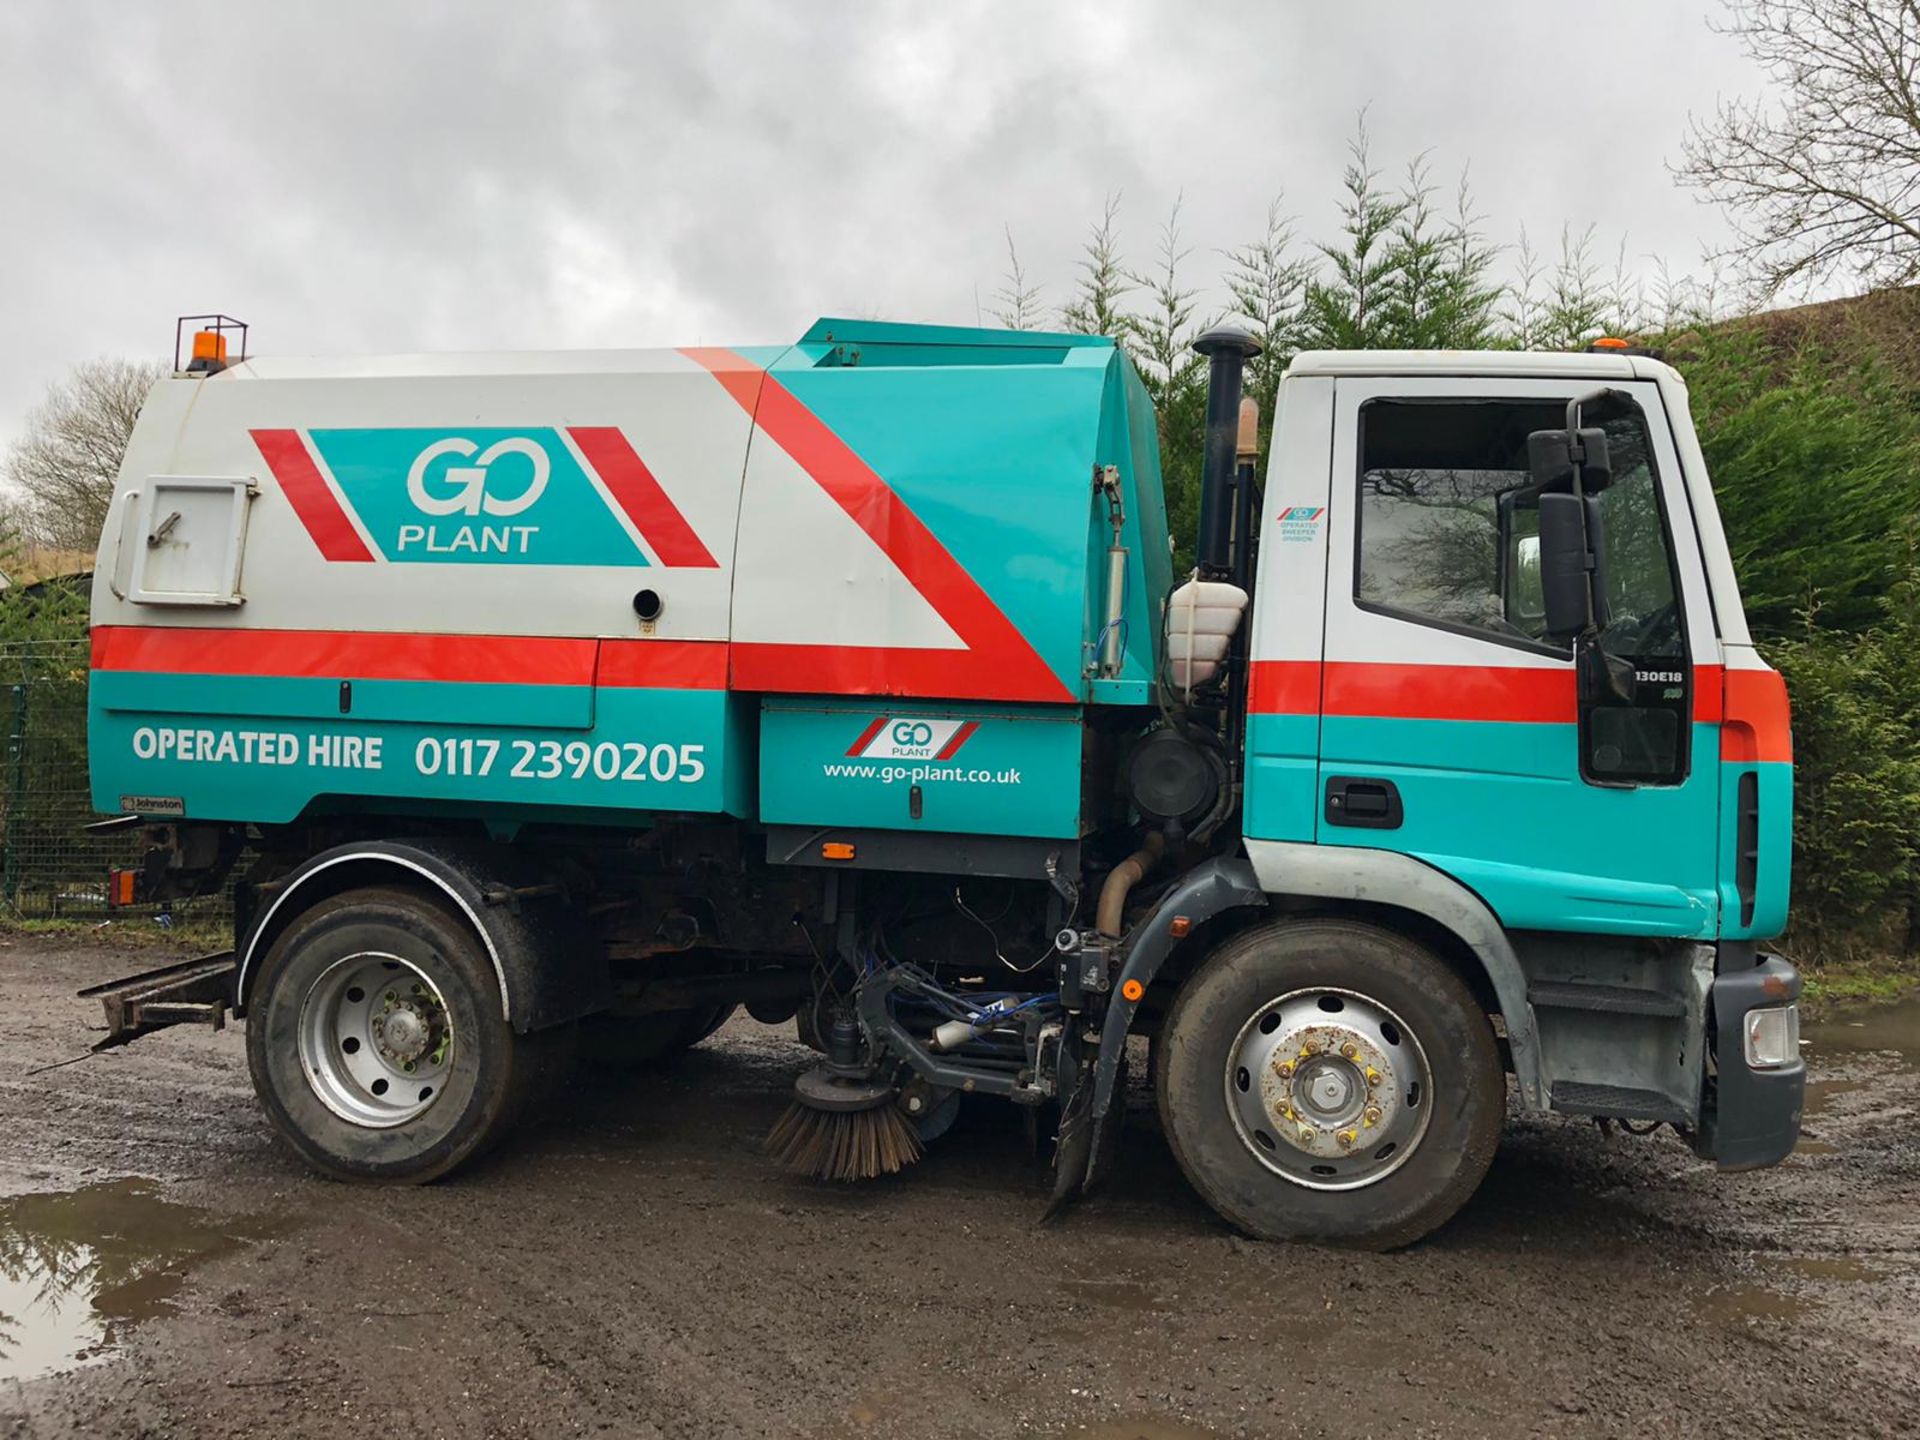 2004/54 REG IVECO EUROCARGO 130E 18 ROAD SWEEPER LORRY C/W JOHNSTON V650 SWEEPER DUEL BRUSH